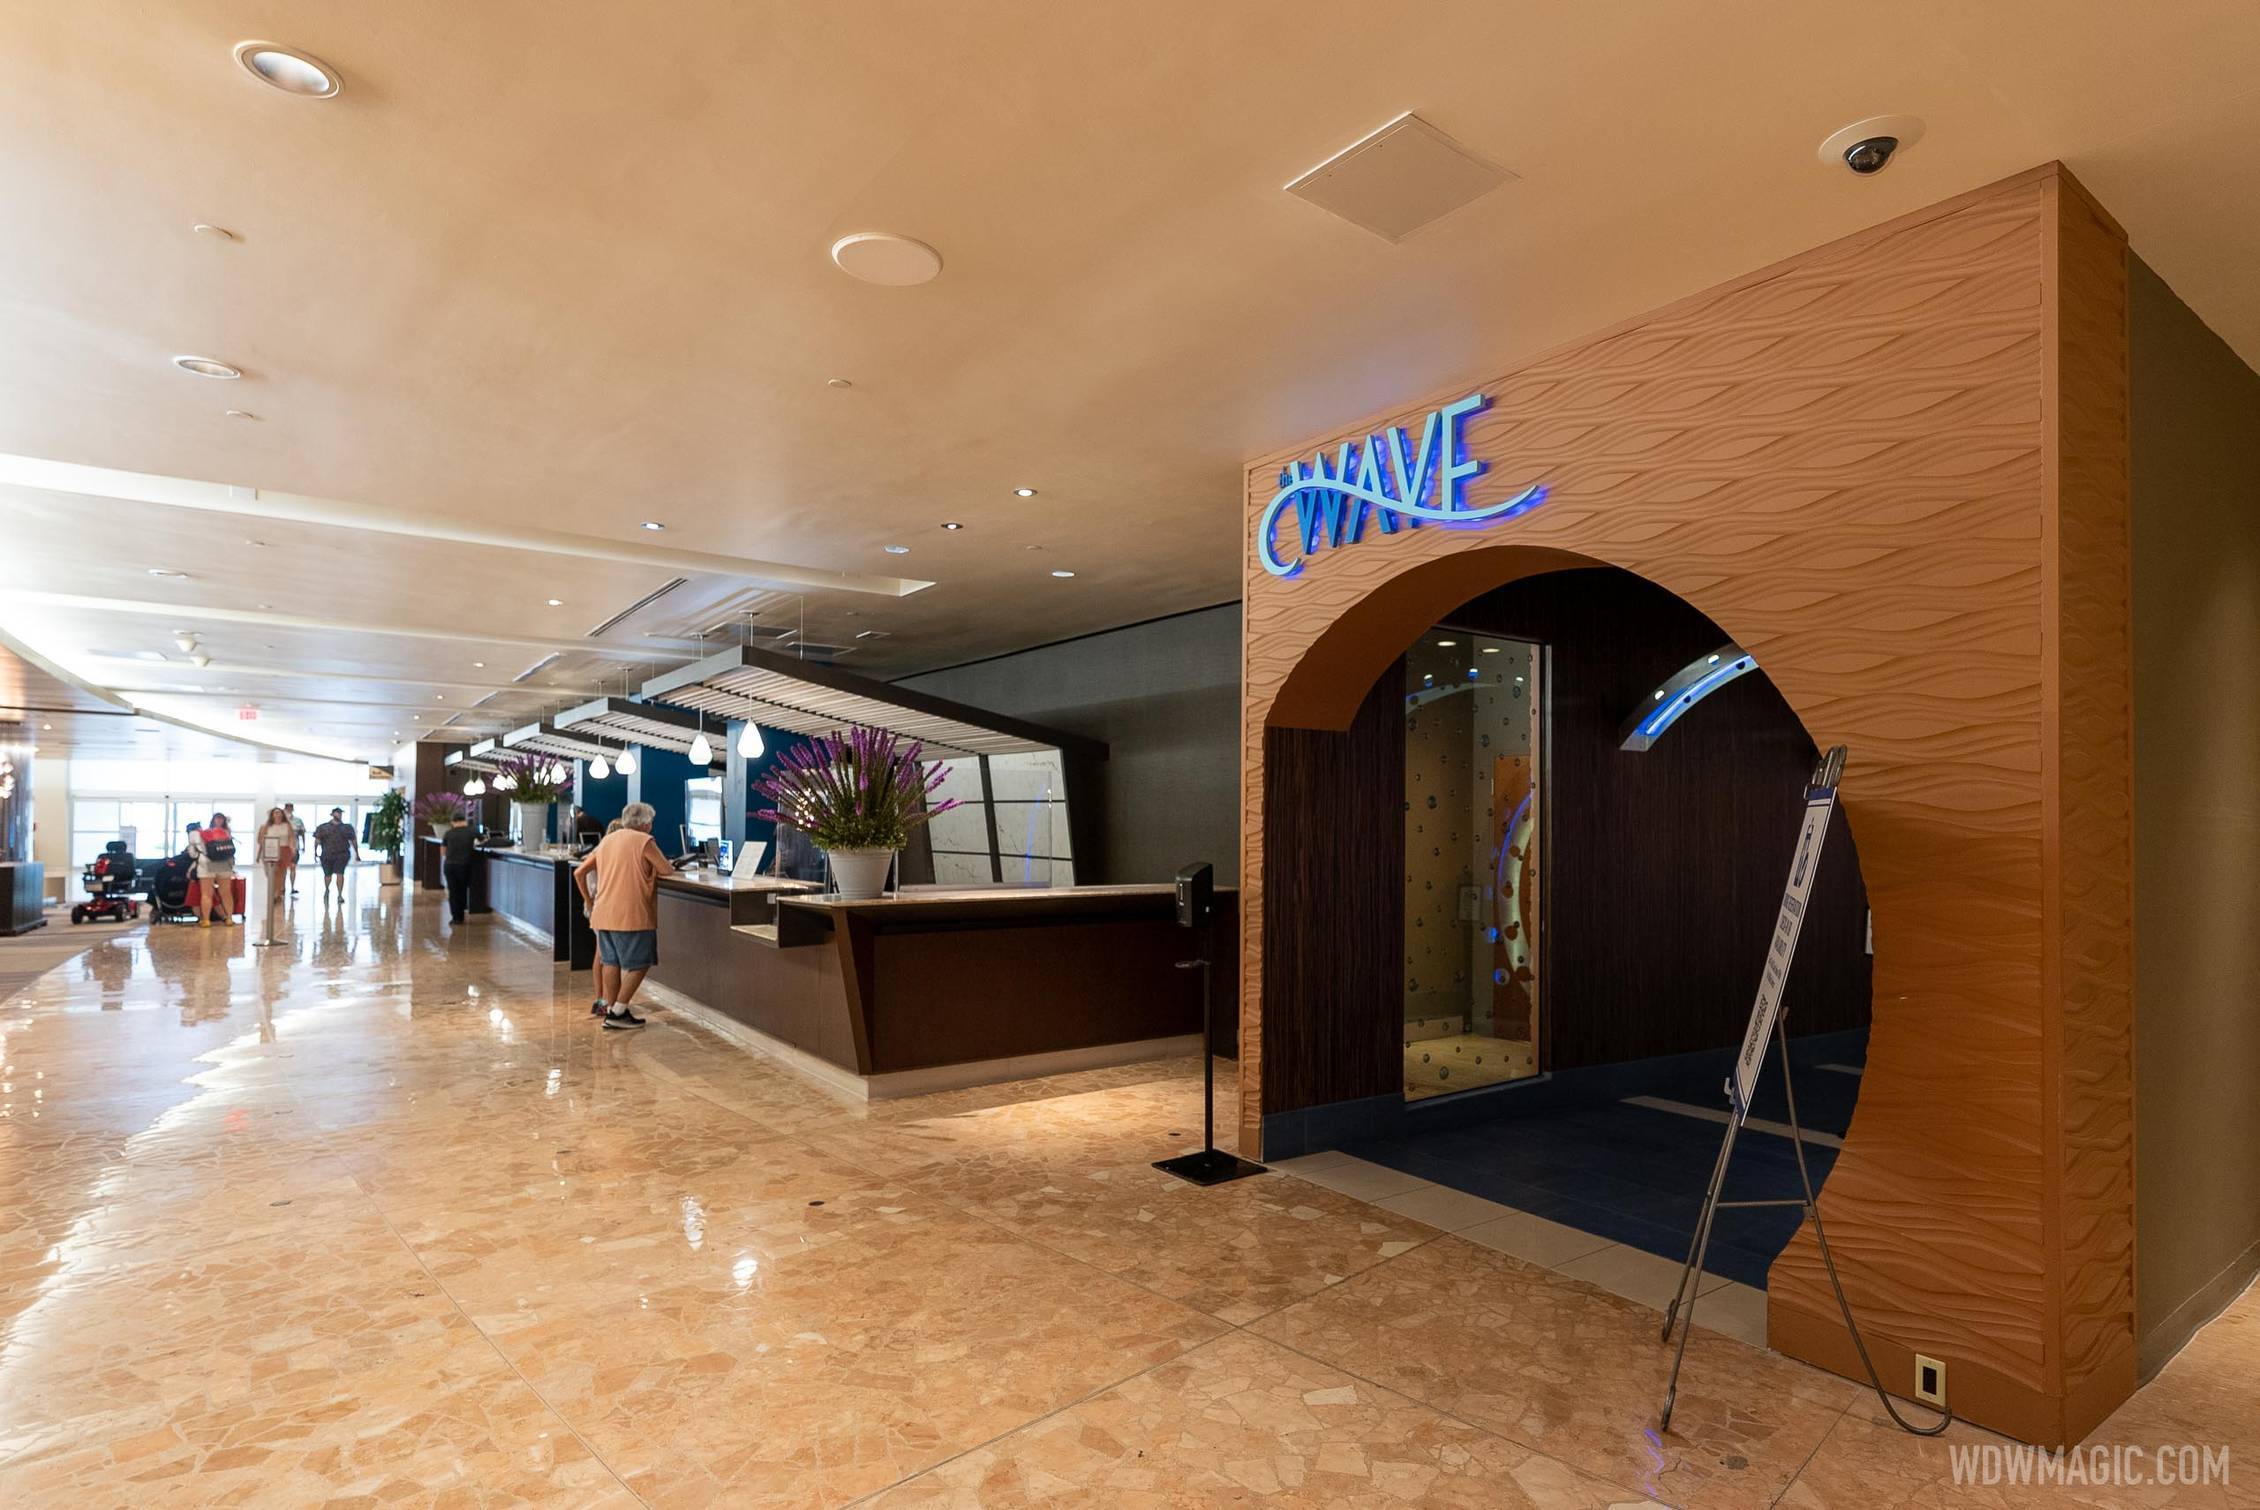 Steakhouse 71 will be located in the resort's lobby area replacing The Wave